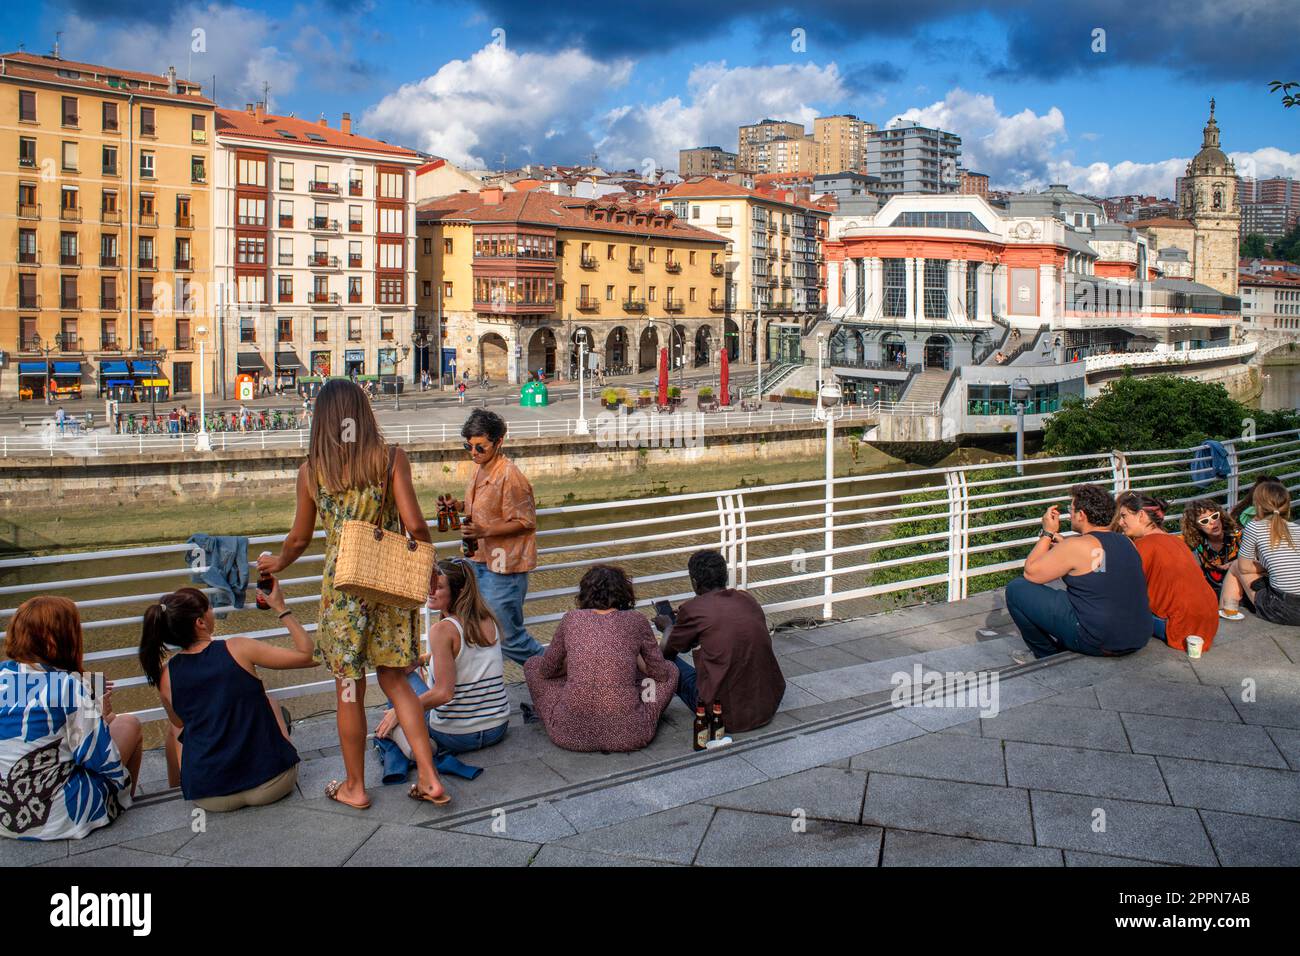 Lifestyle meeting point in front of the historic market La Ribera market along the Nervion River, Bilbao, Spain, Europe Stock Photo